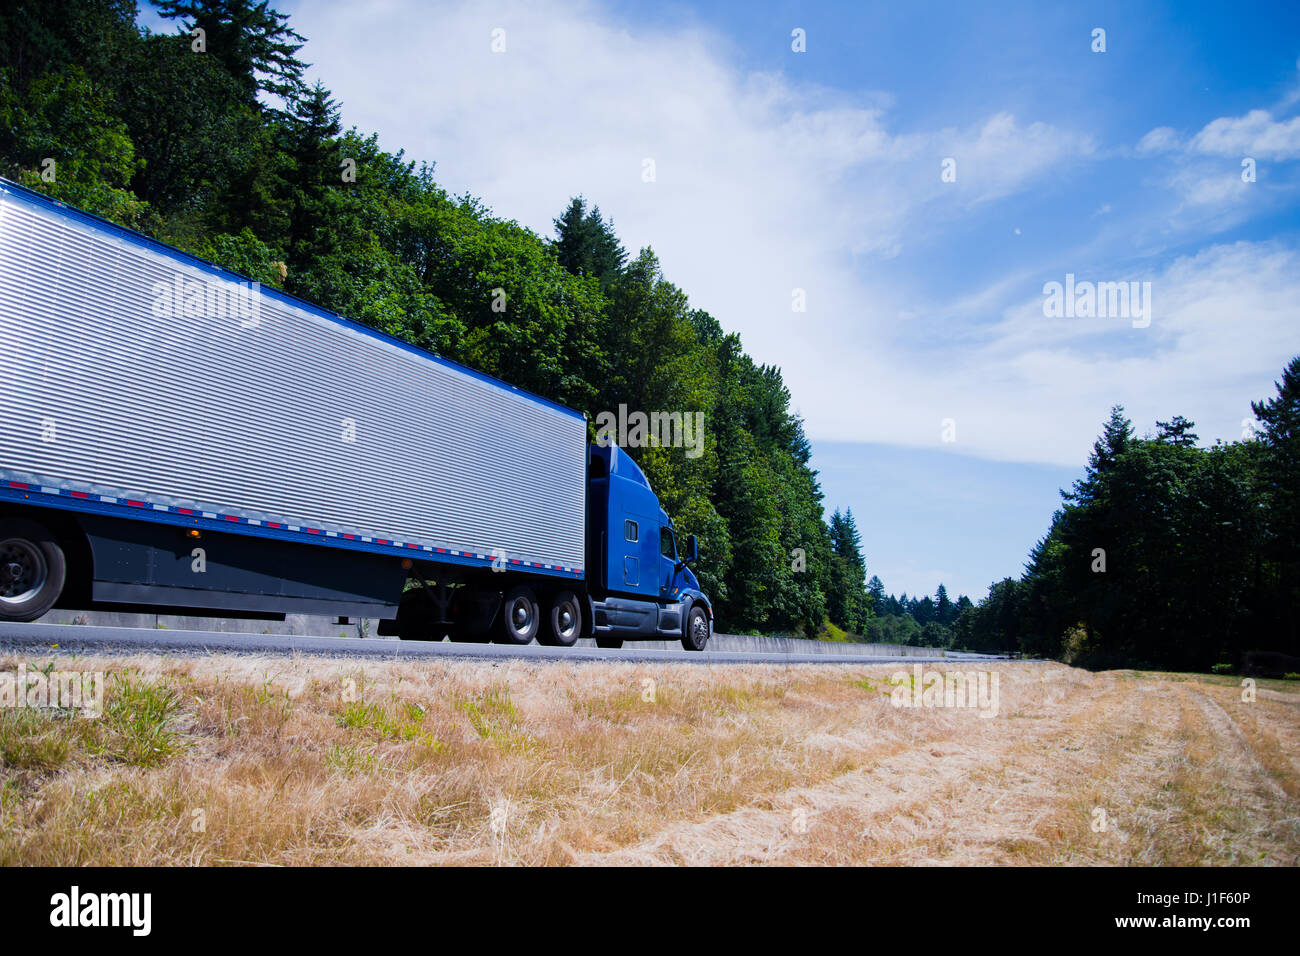 The modern model of the blue big rig semi truck with aluminum fluted corrugated refrigerator trailer speeding on a scenic green trees highway Stock Photo